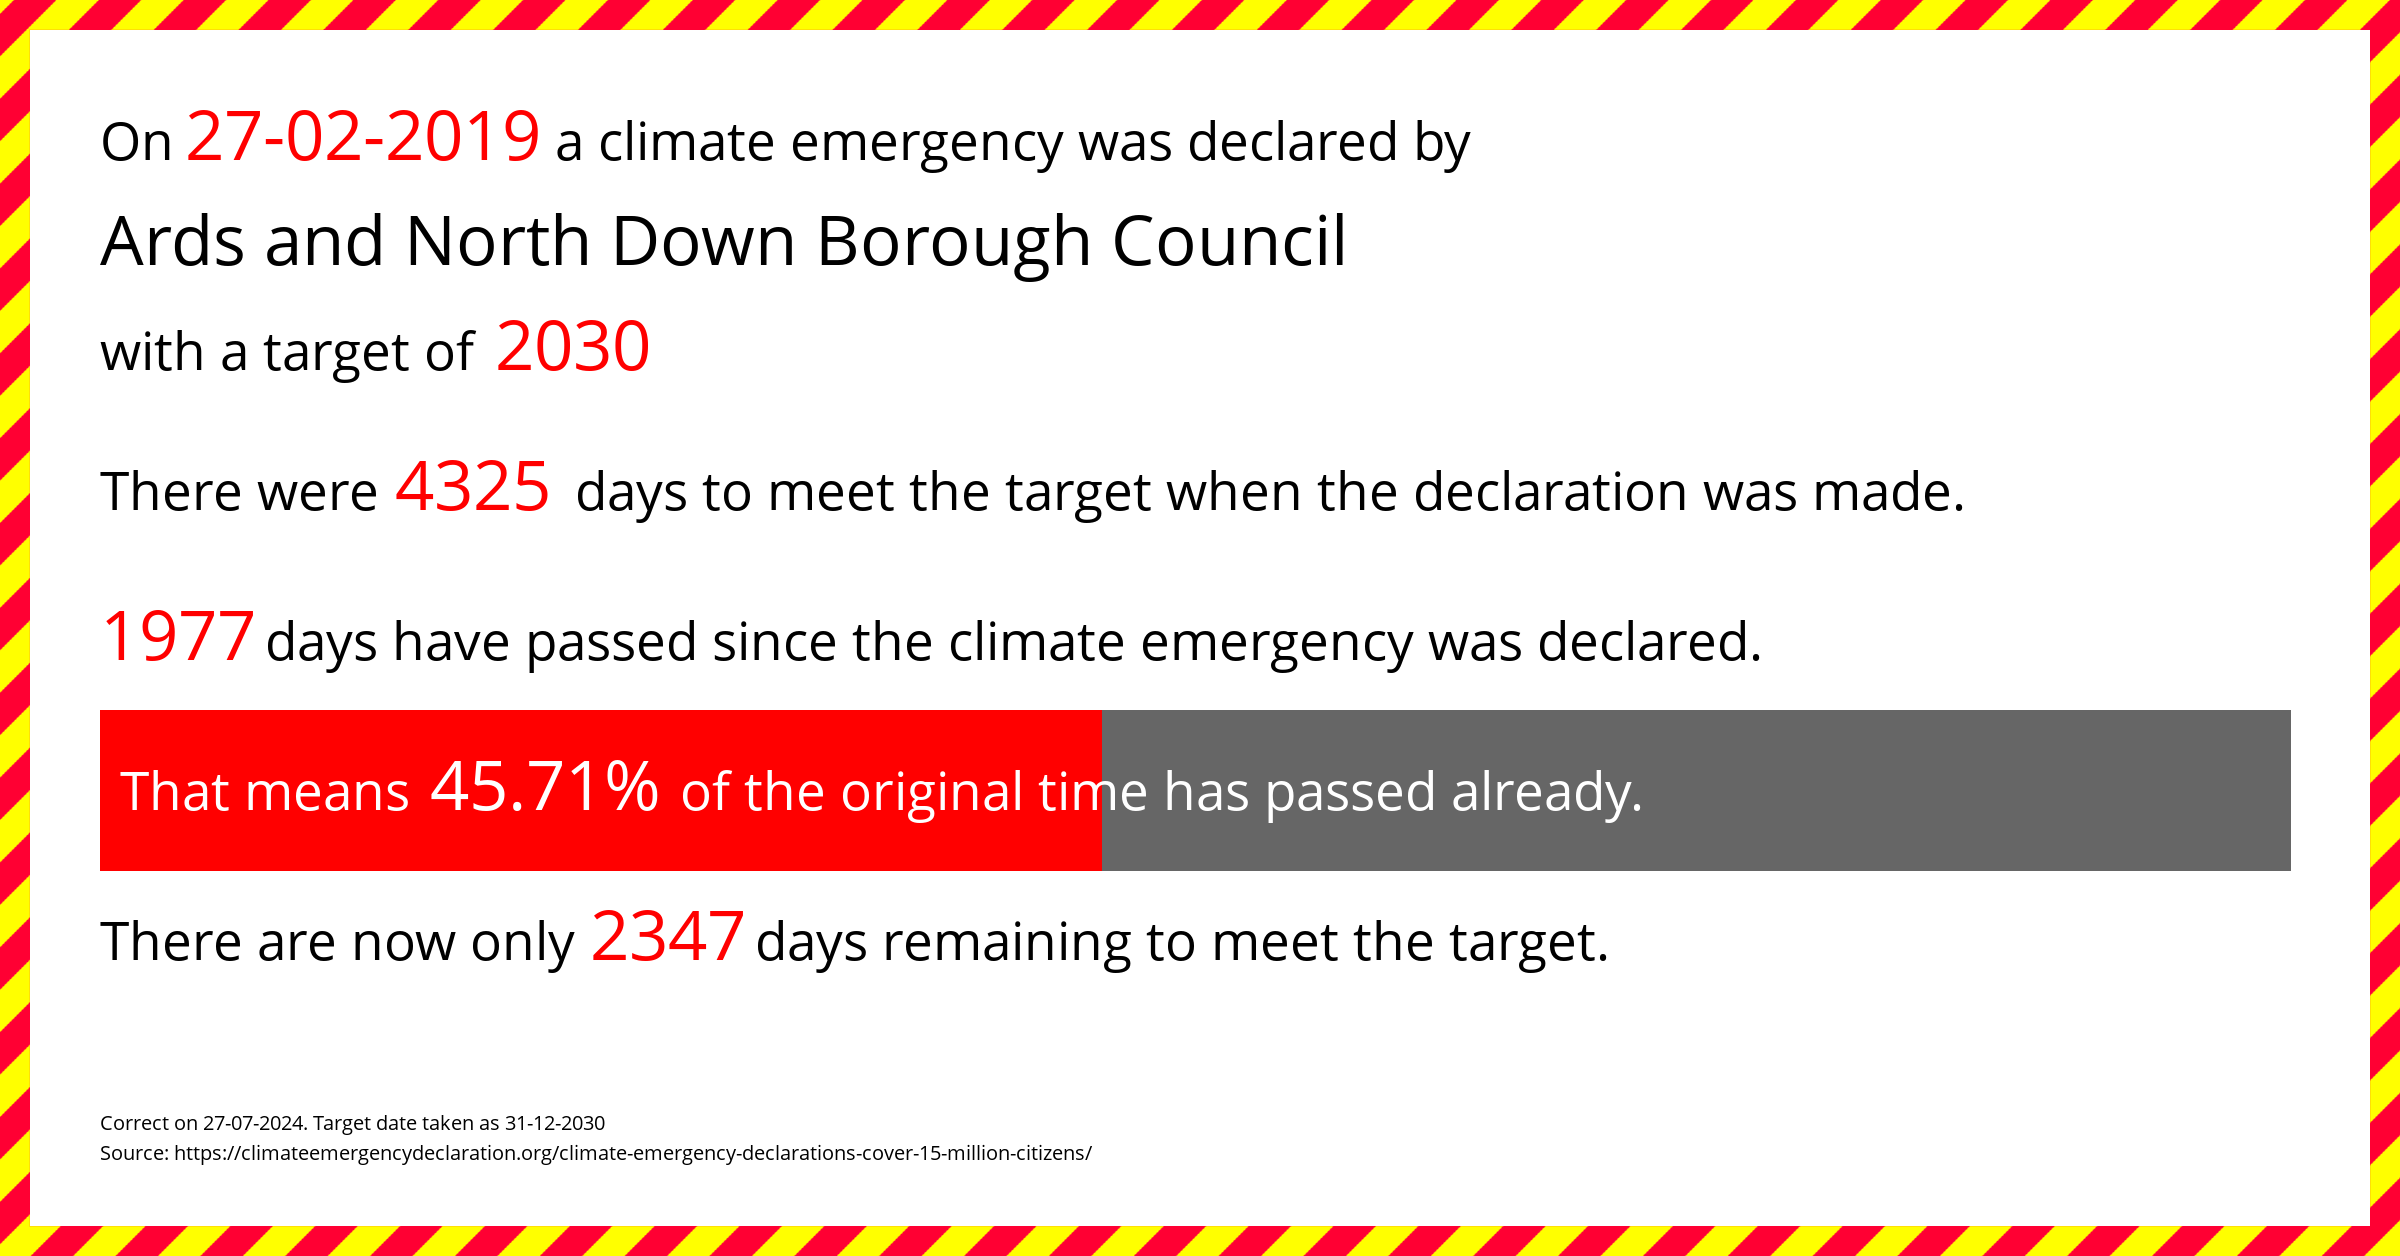 Ards and North Down Borough Council declared a Climate emergency on Wednesday 27th February 2019, with a target of 2030.